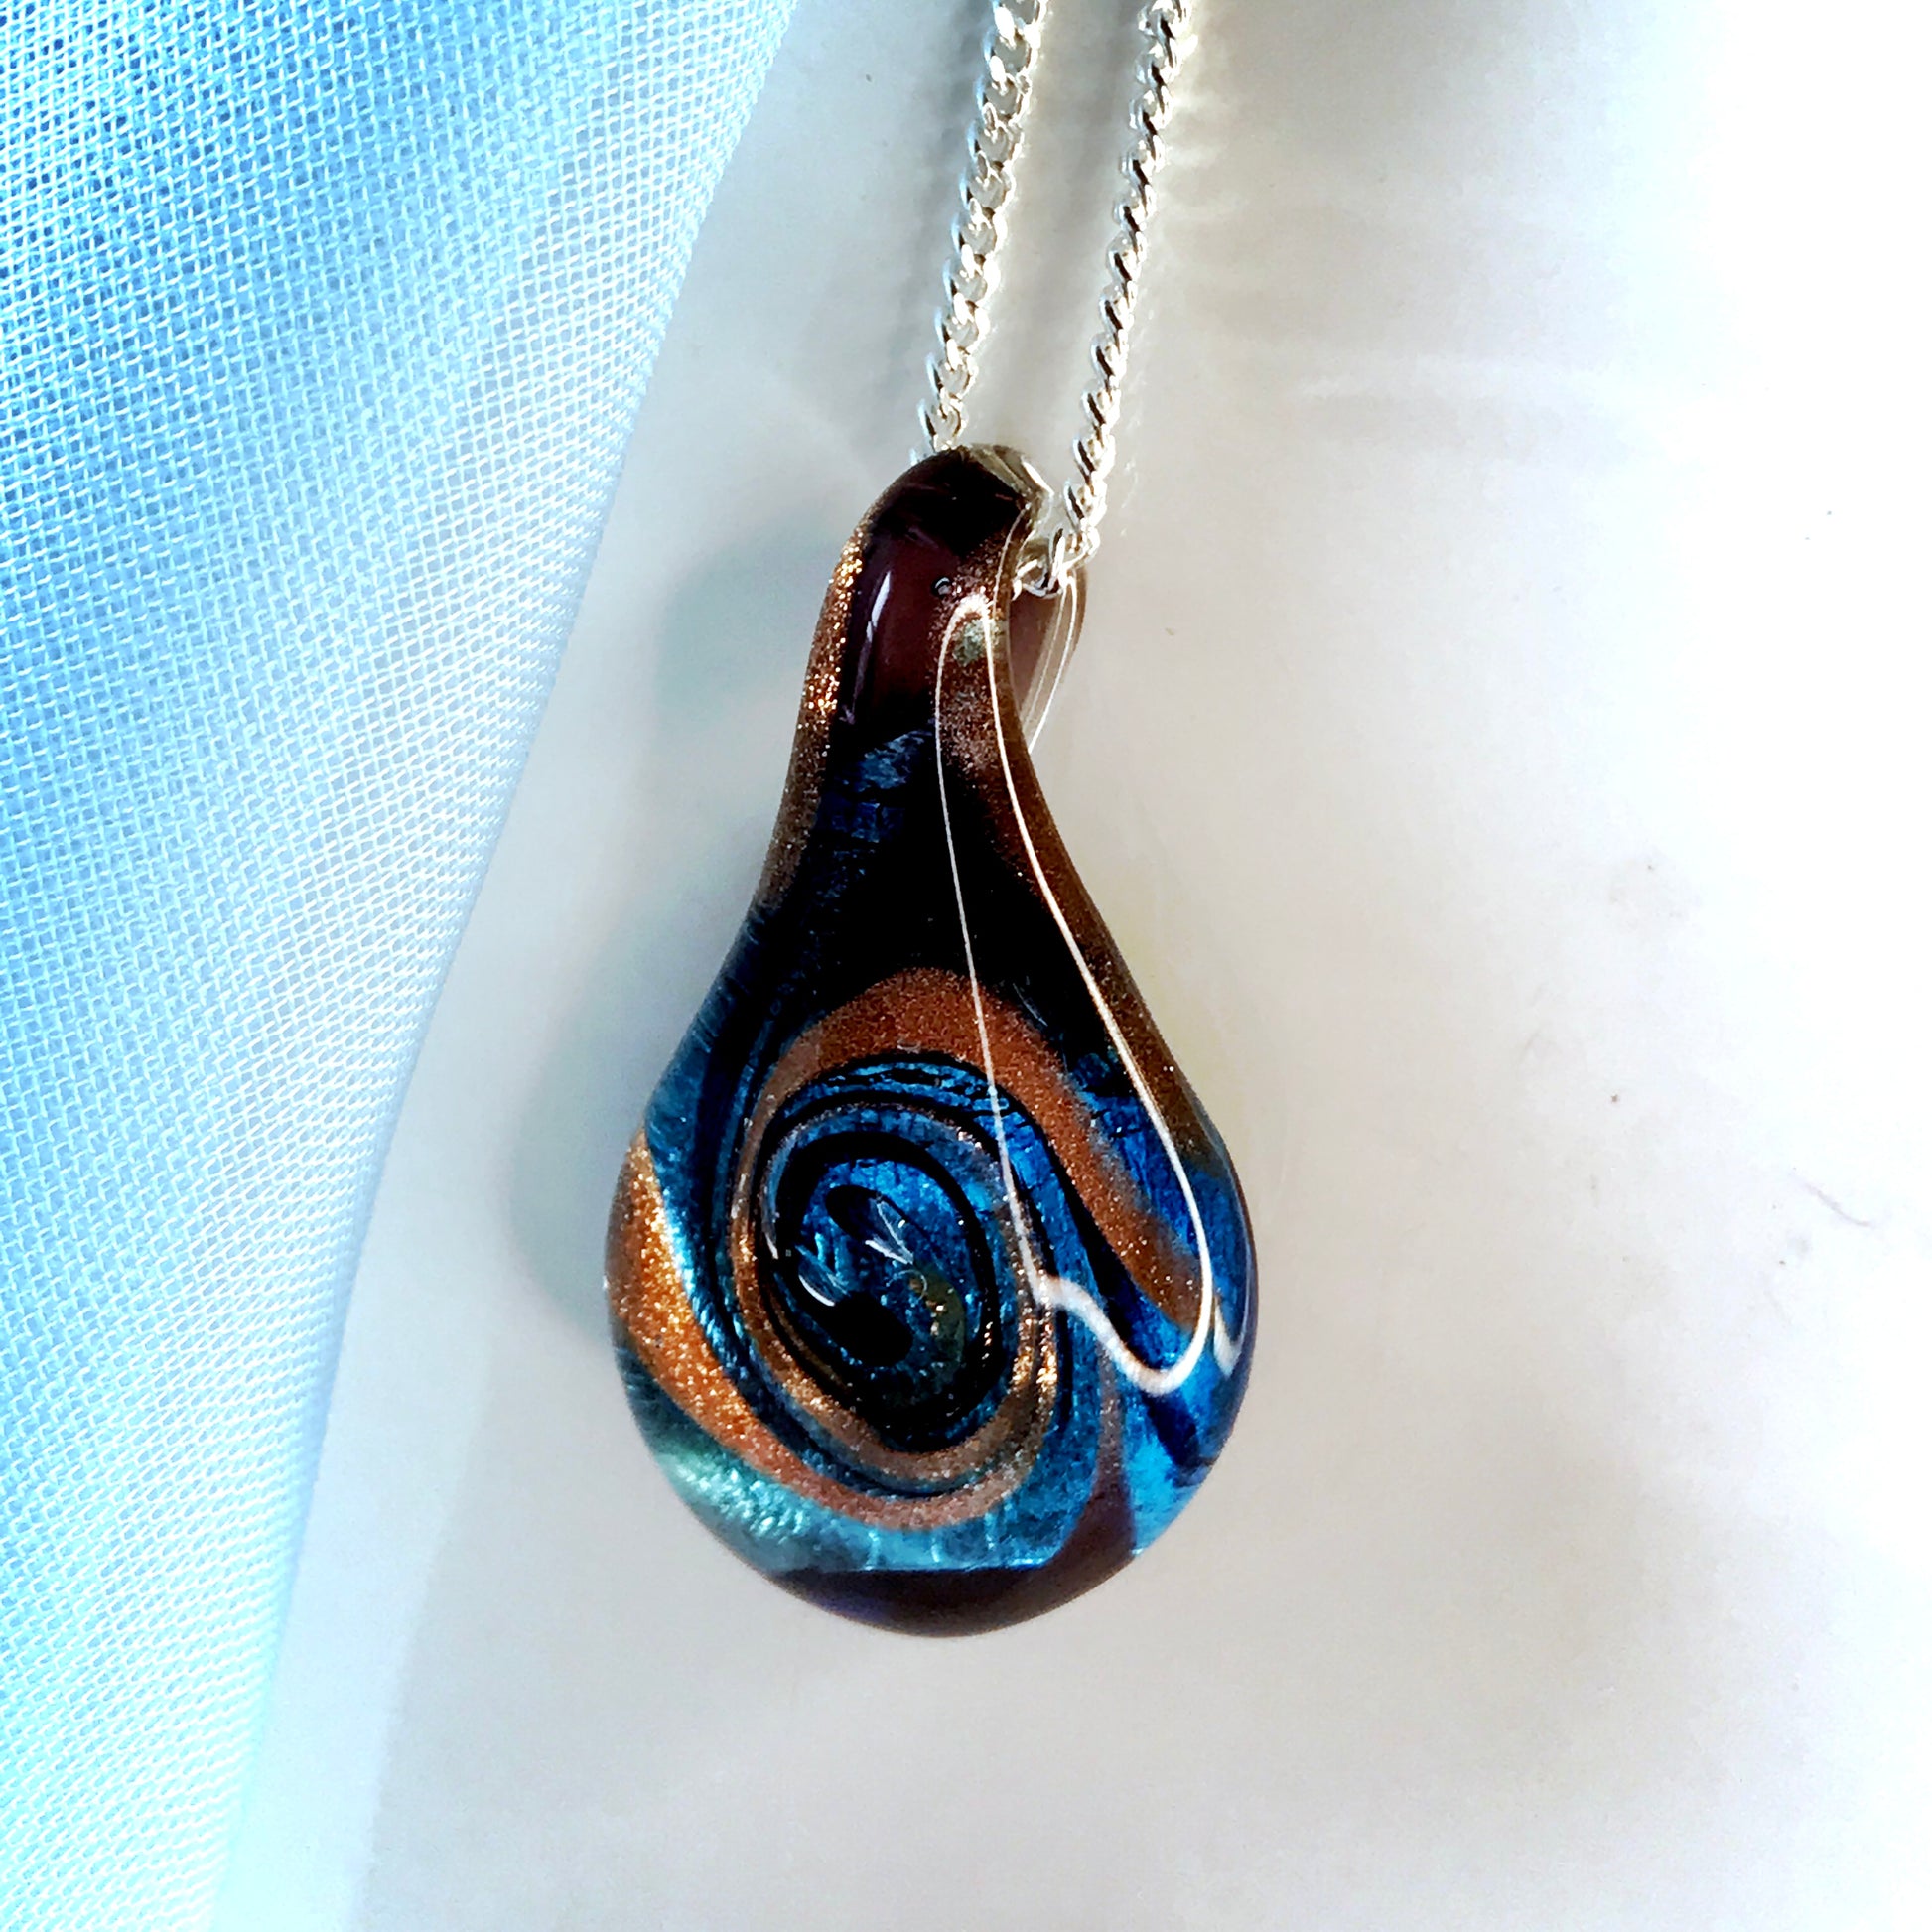 Blue real Murano glass tear drop necklace pendant including chain